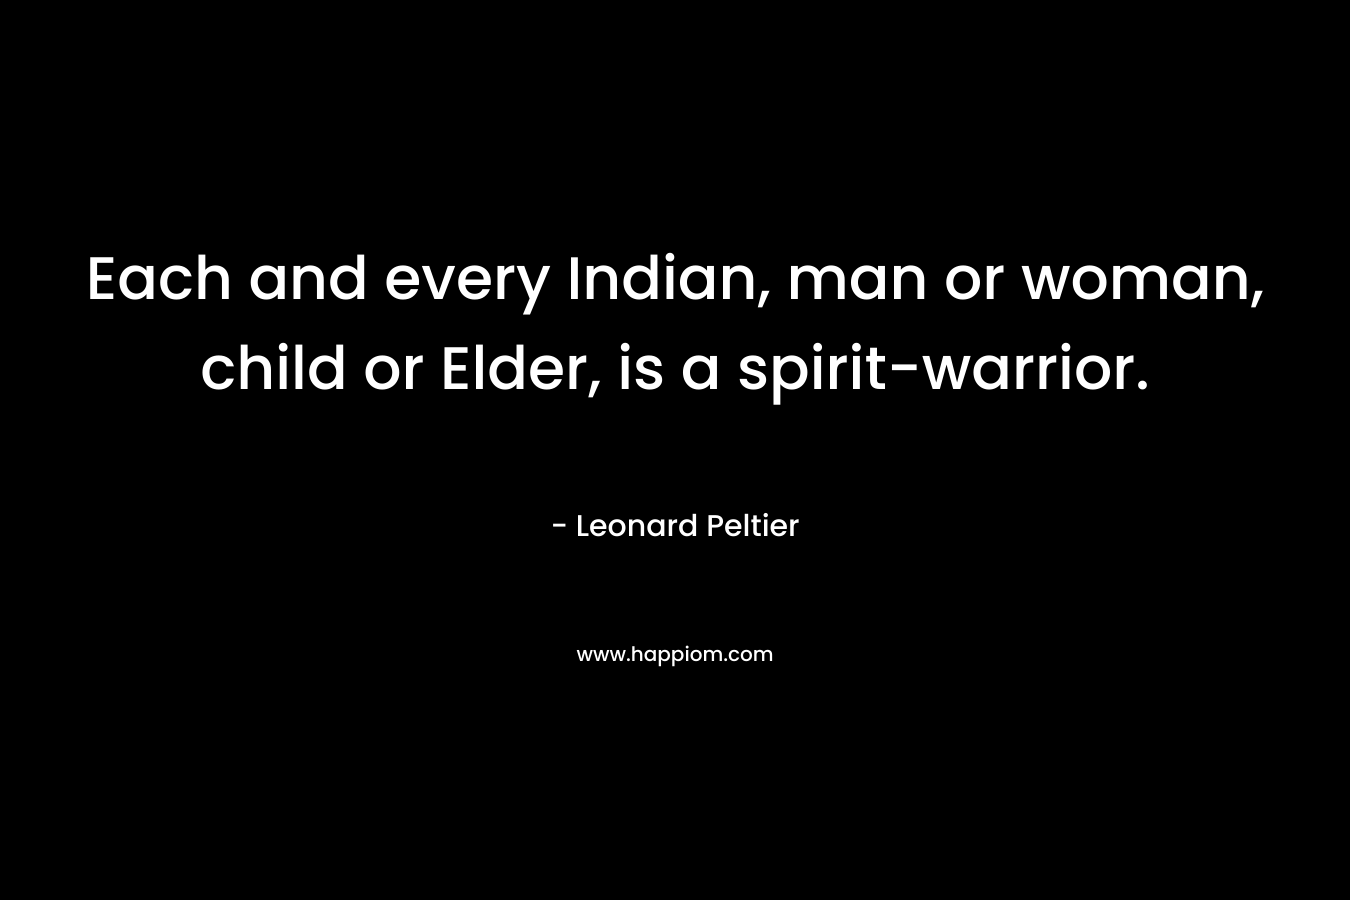 Each and every Indian, man or woman, child or Elder, is a spirit-warrior.